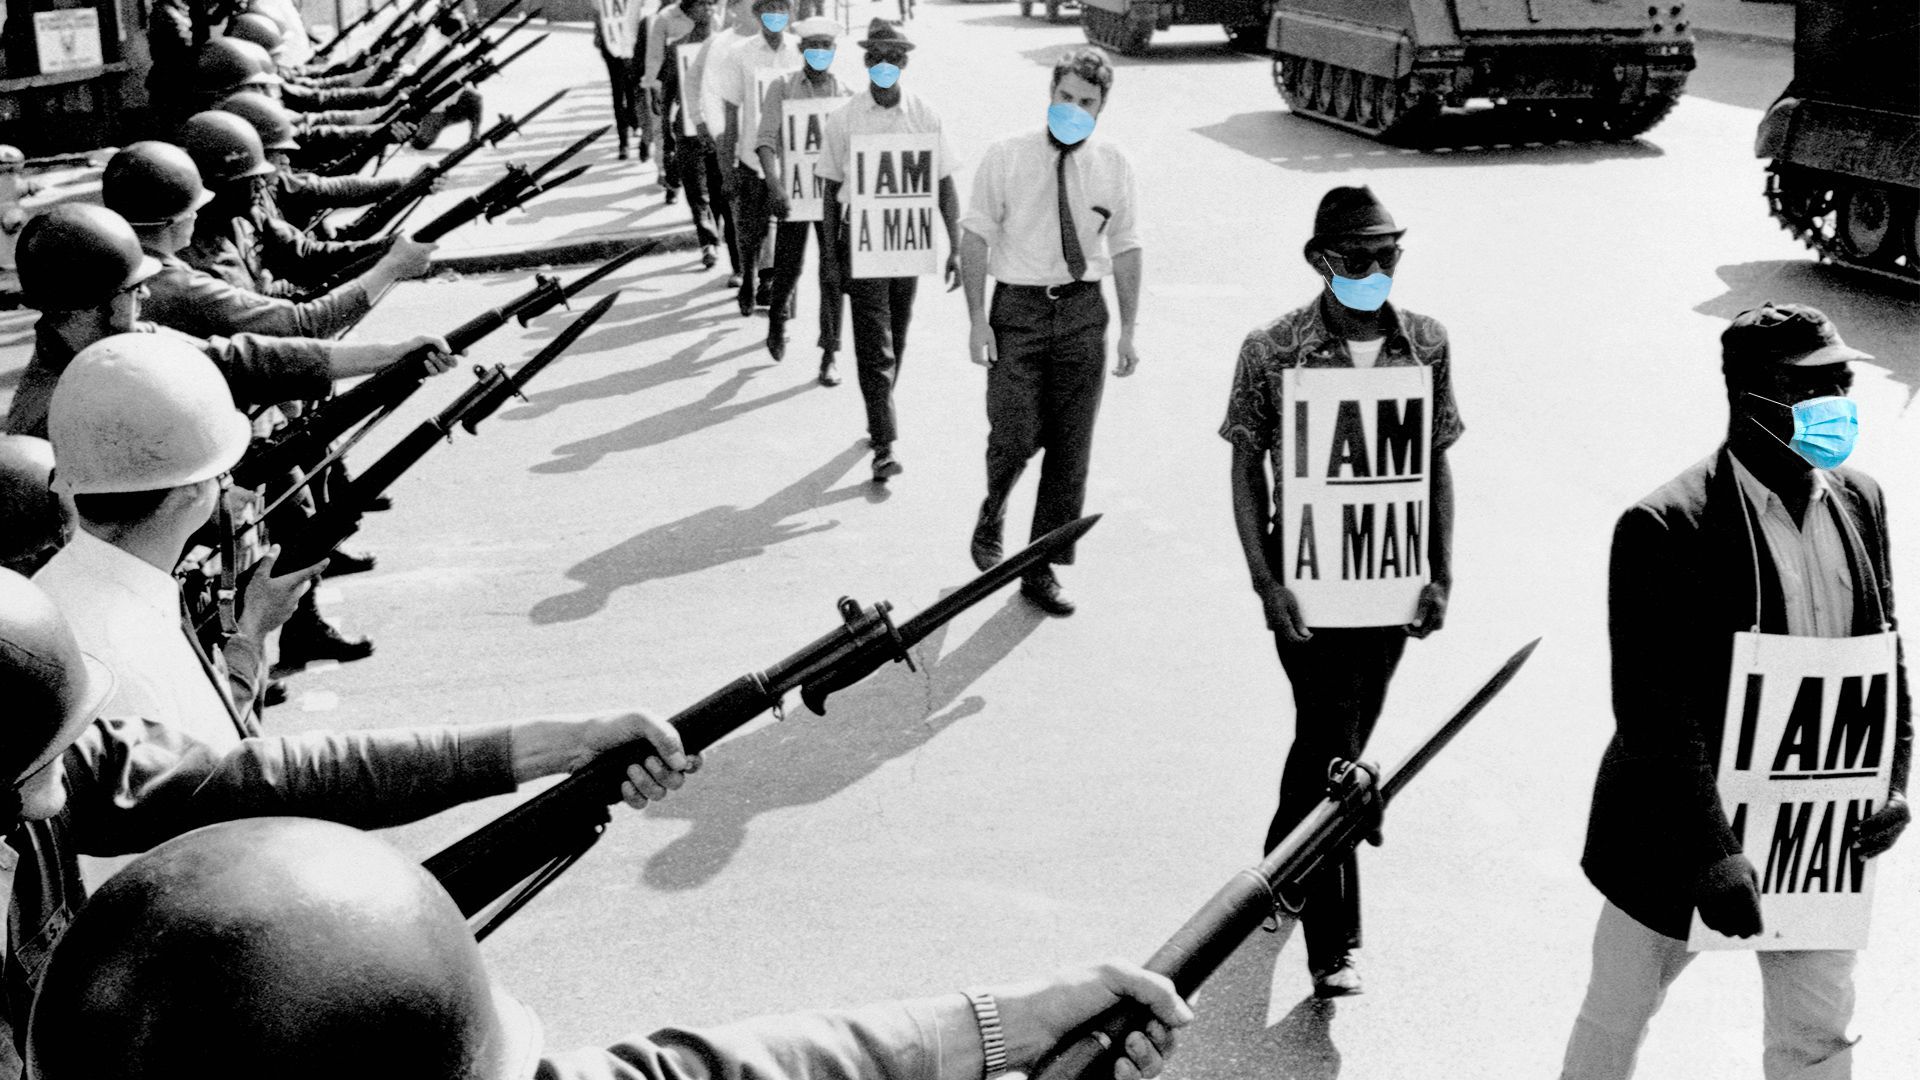 Illustration of Civil Rights marchers with "I Am A Man" signs wearing surgical masks